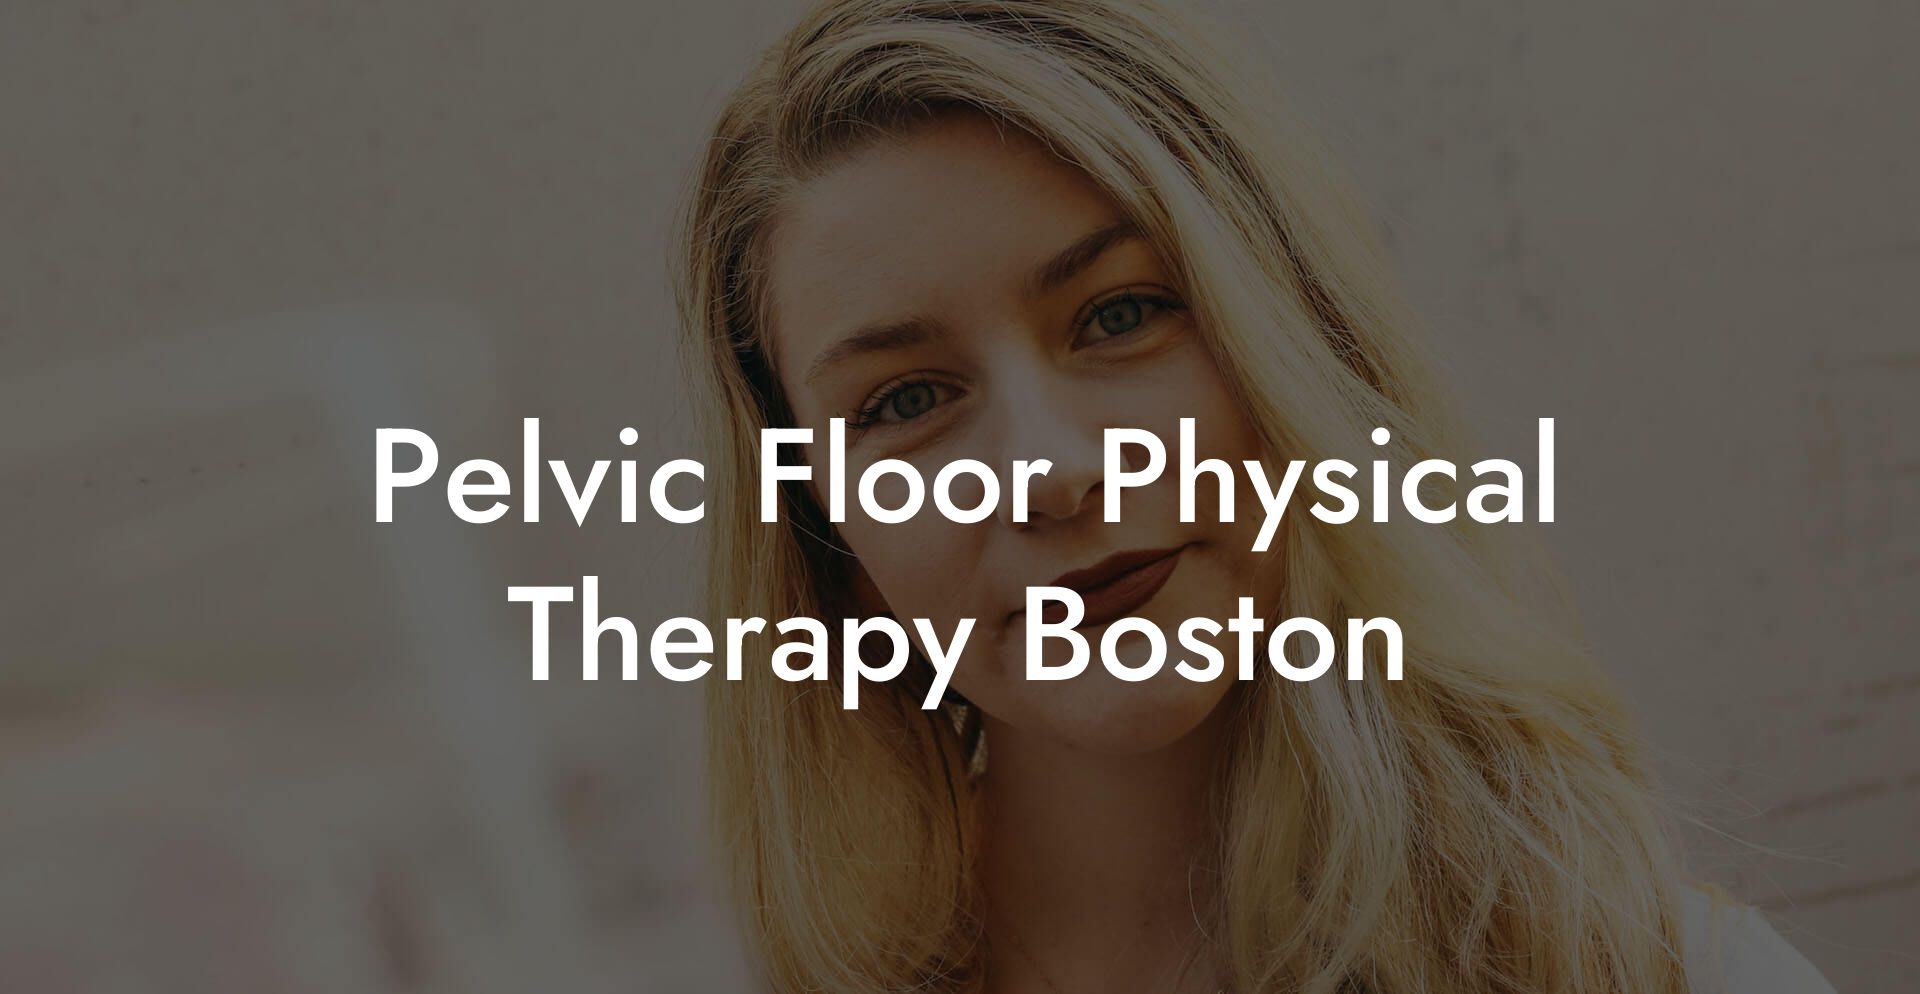 Pelvic Floor Physical Therapy Boston